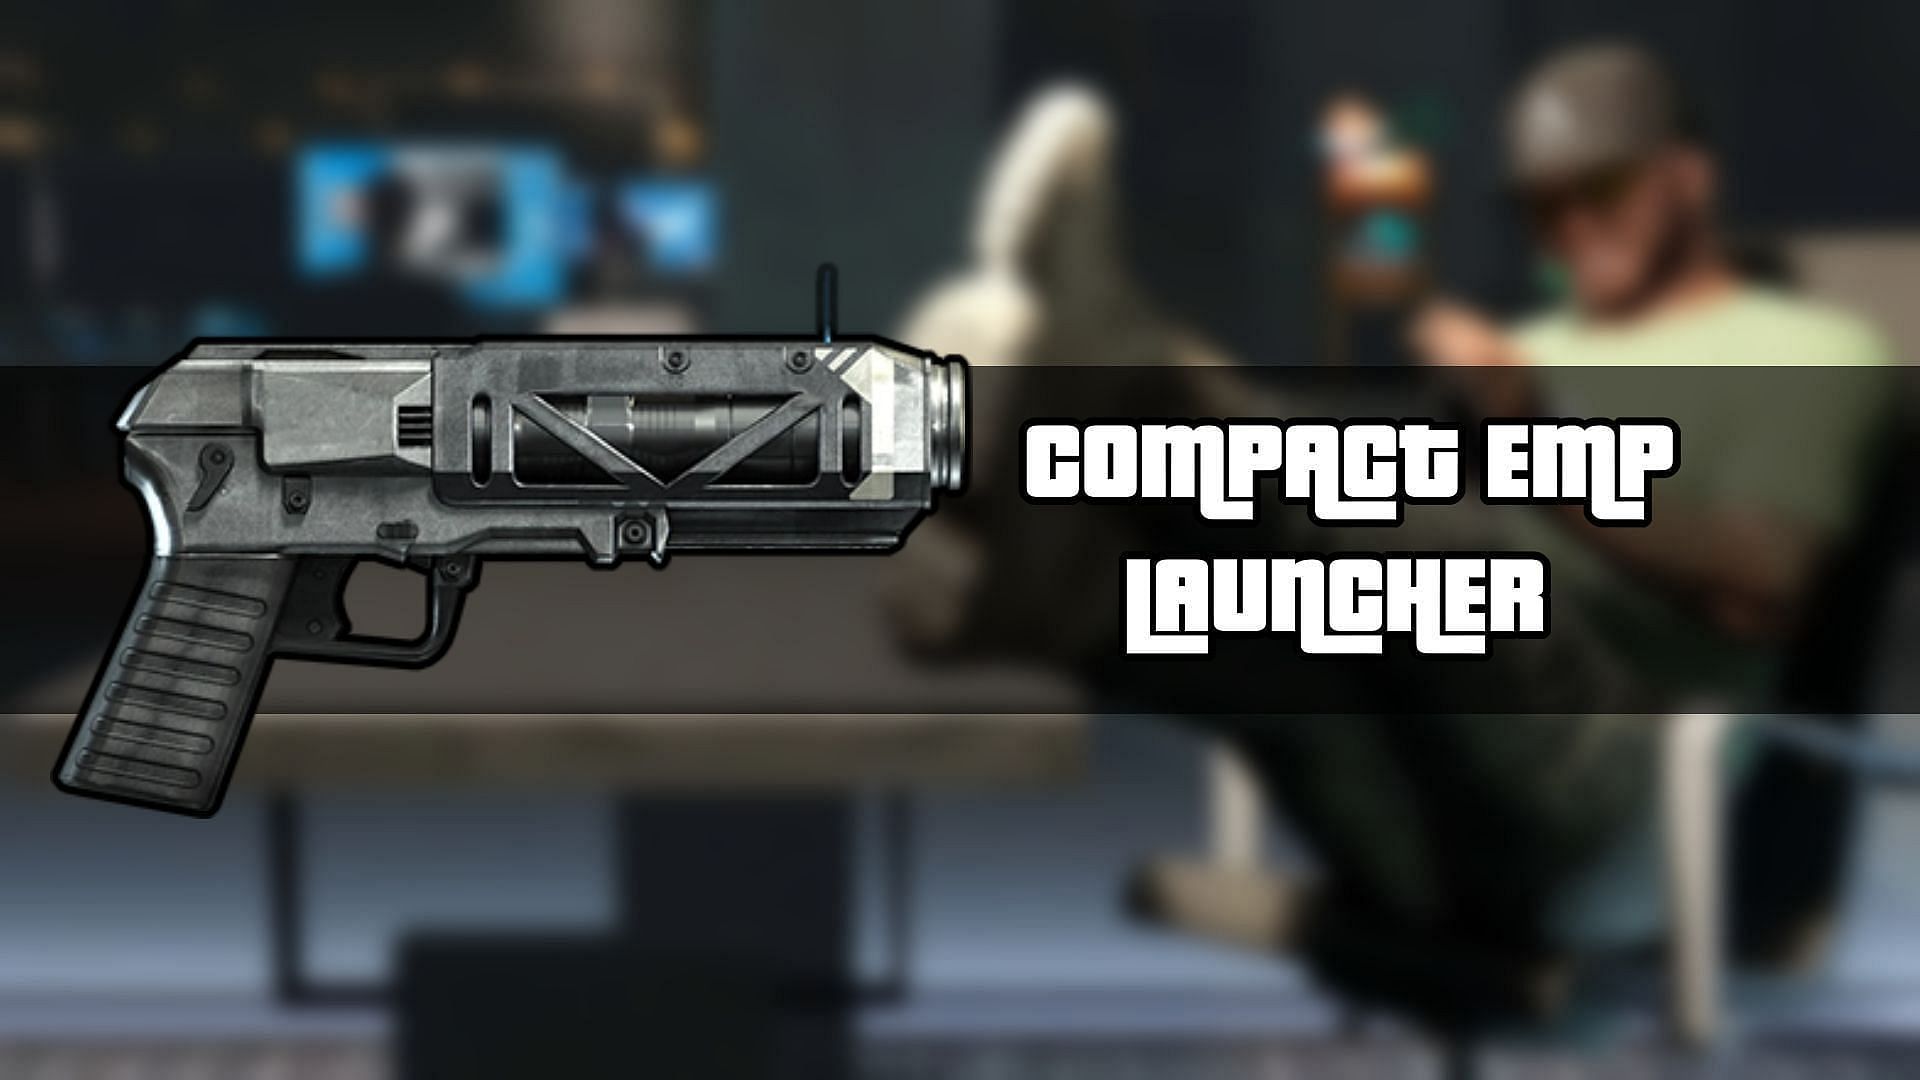 The Compact EMP Launcher in GTA Online (Image via Rockstar Games)